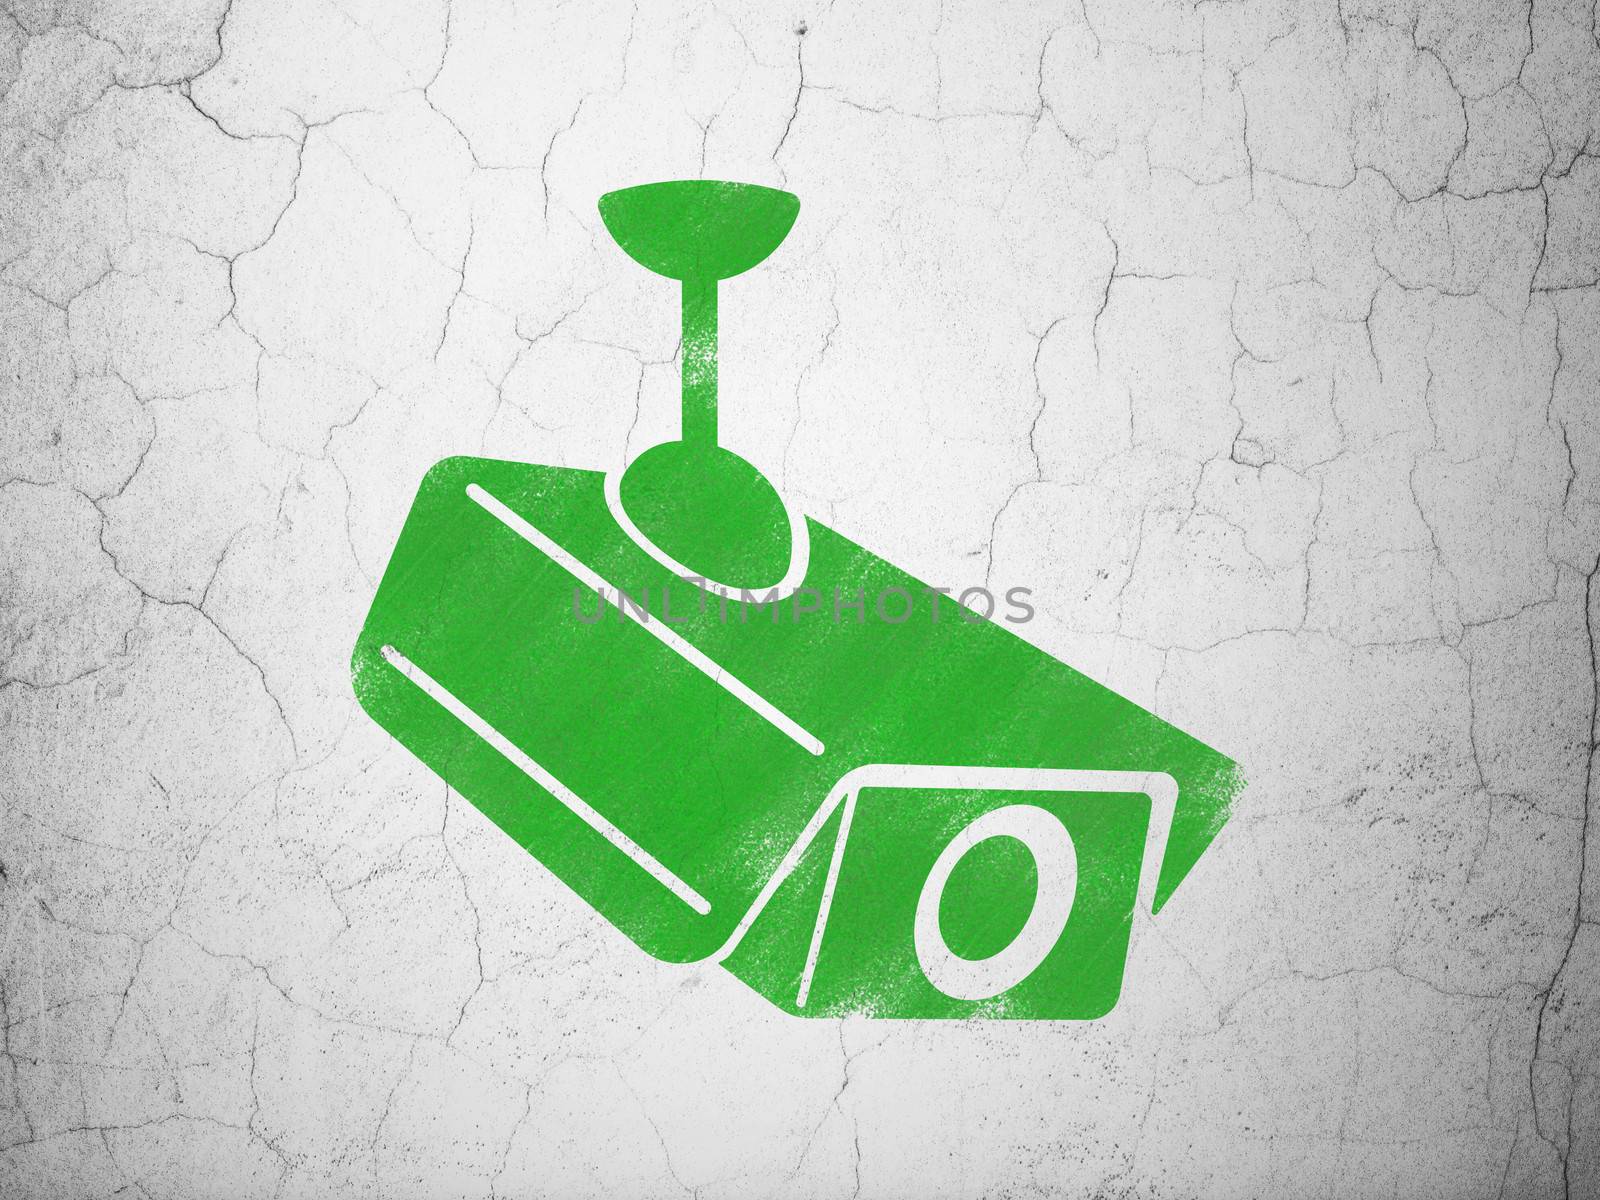 Security concept: Green Cctv Camera on textured concrete wall background, 3d render